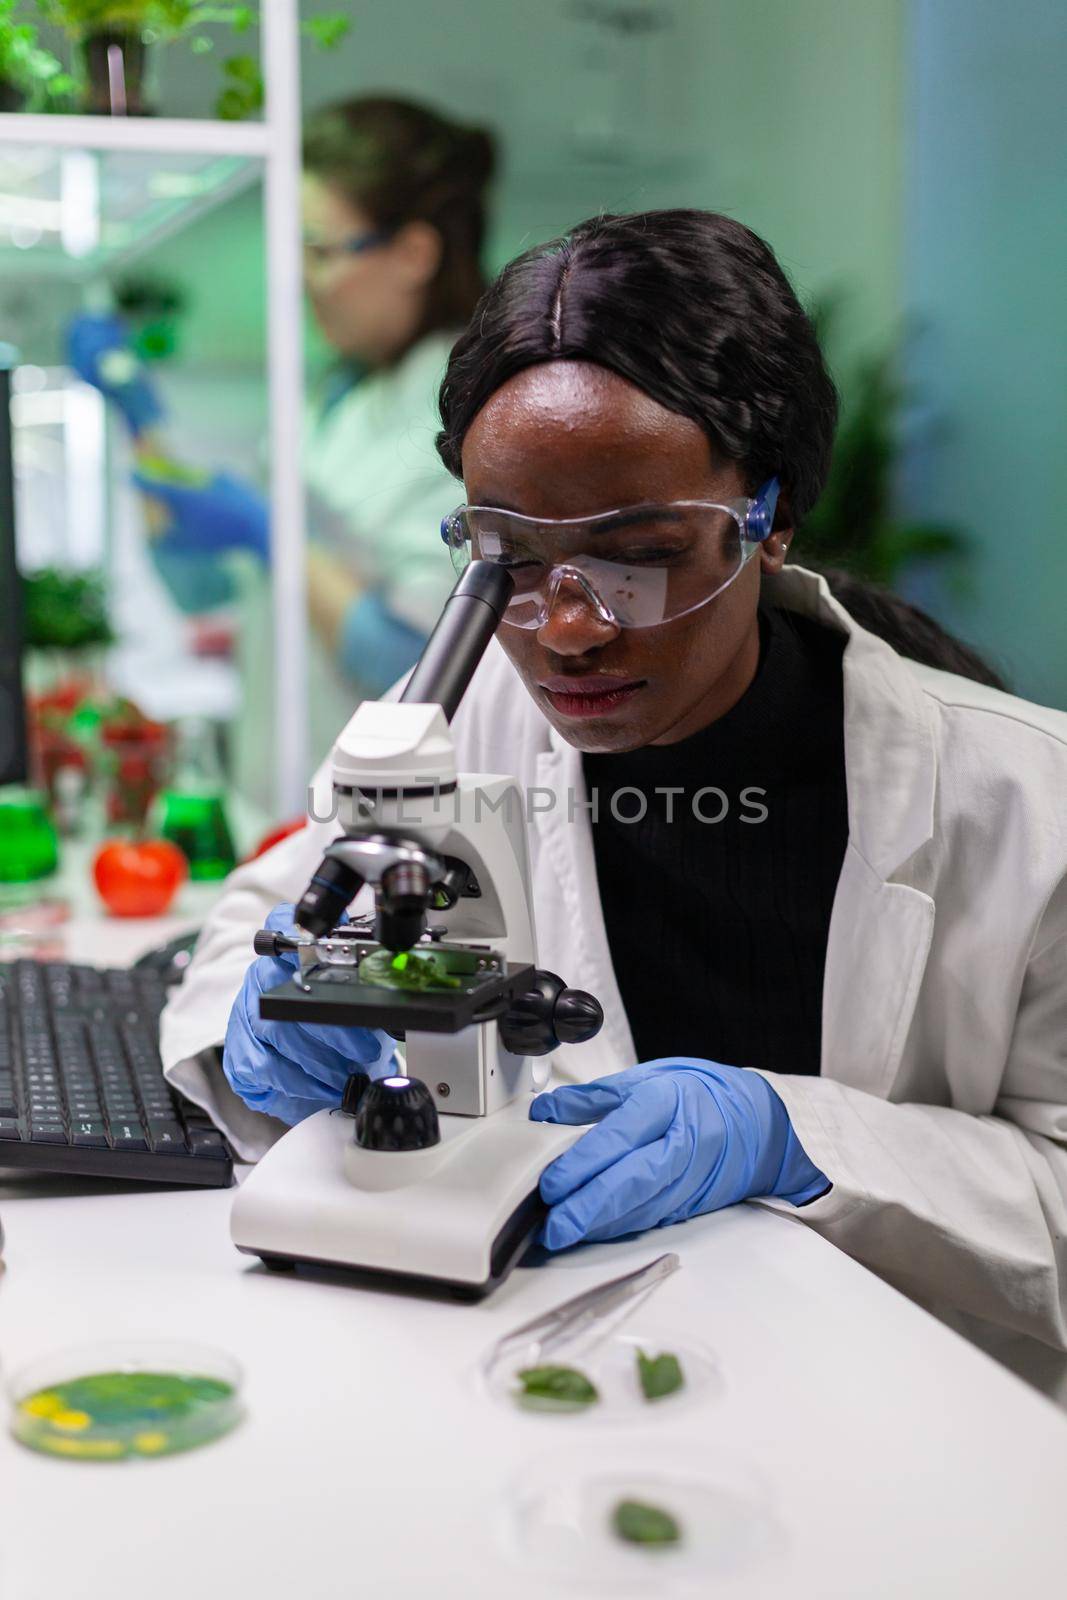 African biologist researcher analyzing gmo green leaf using medical microscope. Chemist scientist examining organic agriculture plants in microbiology scientific laboratory.